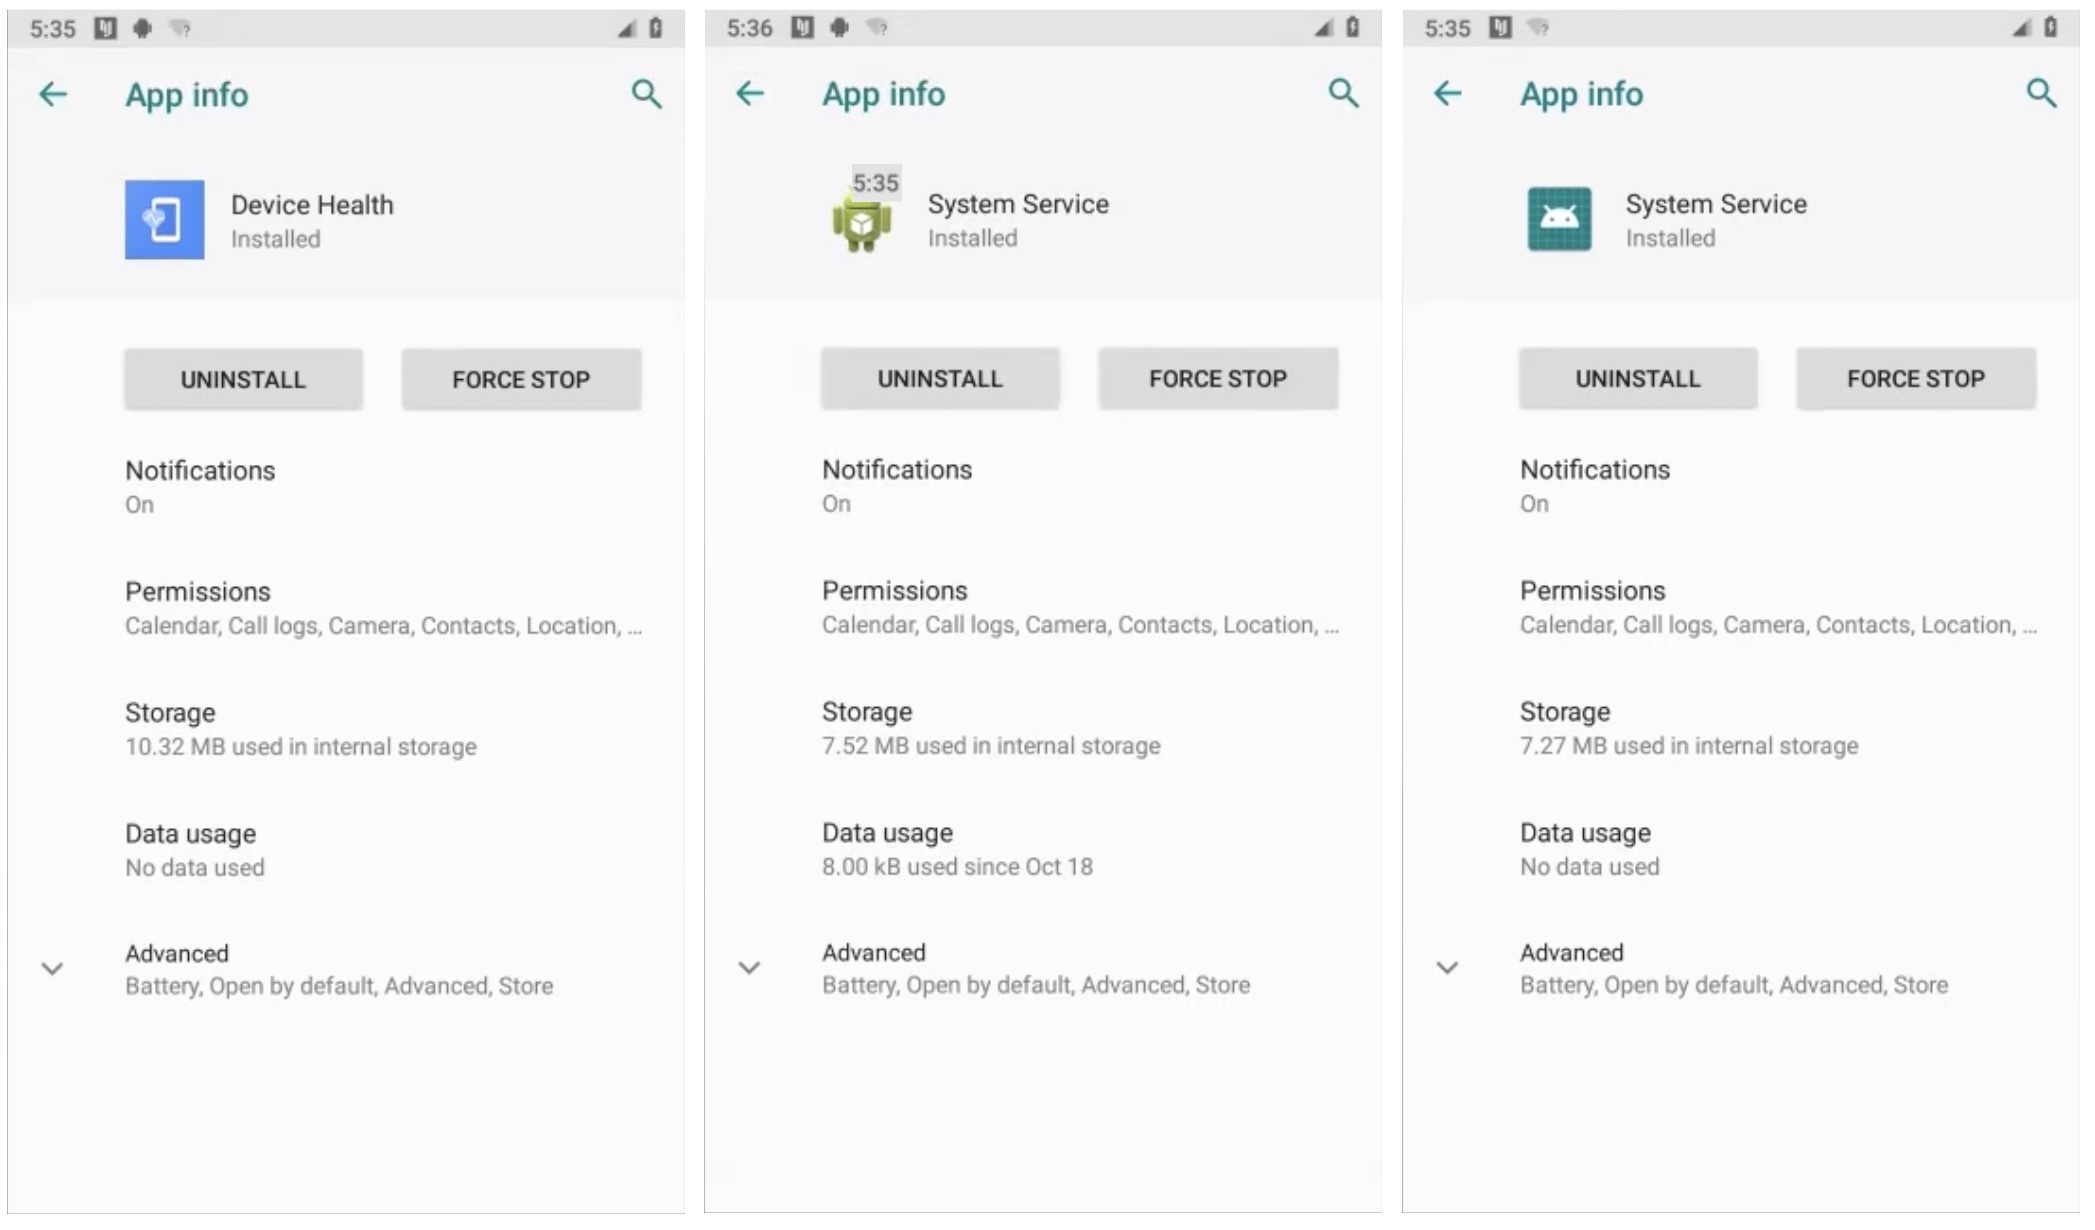 Three screenshots of spyware apps, named "Device Health" spirit "System Service."